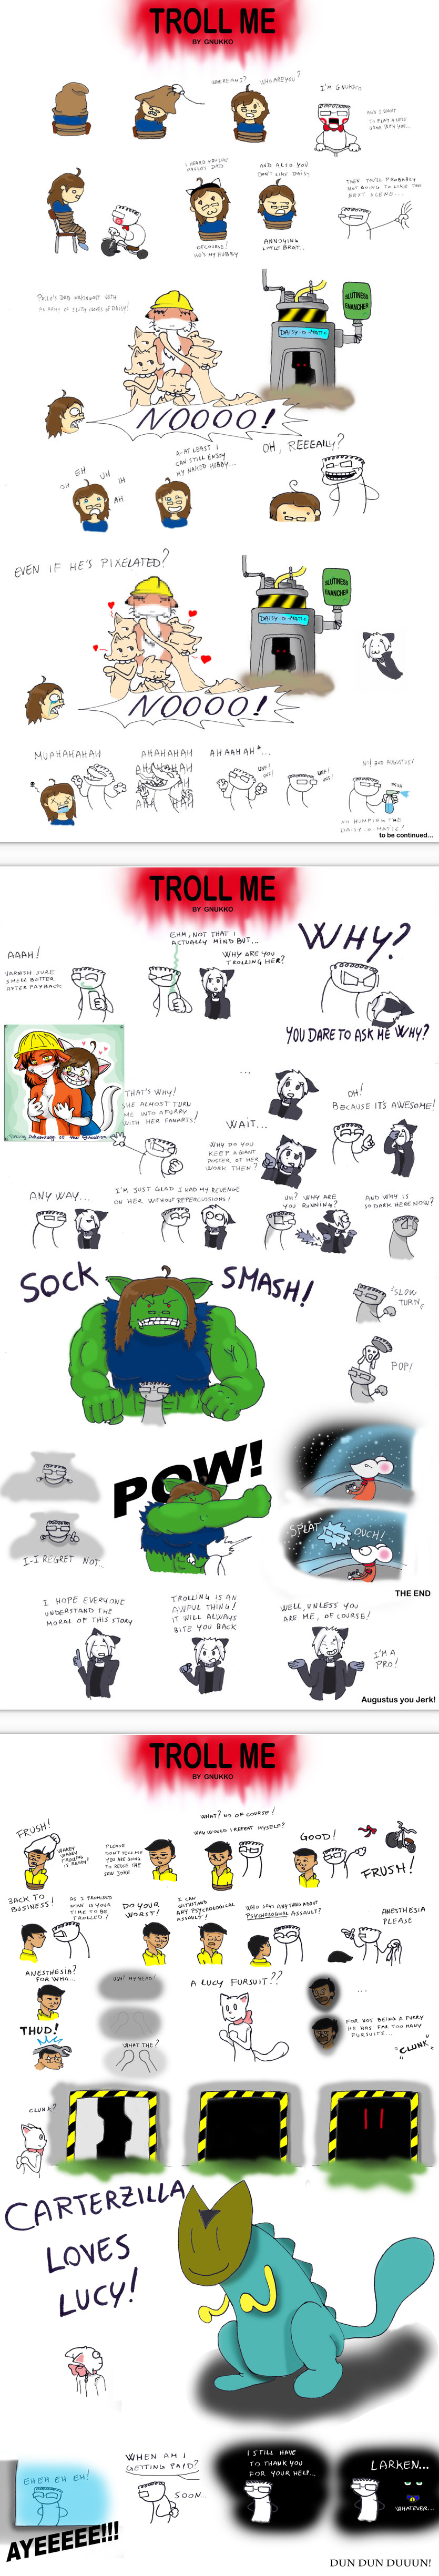 Candybooru image #3006, tagged with Augustus Daisy Gnukko_(Artist) Kaxbe Larken Lucy Paulo's_dad Sock SpaceMouse comic